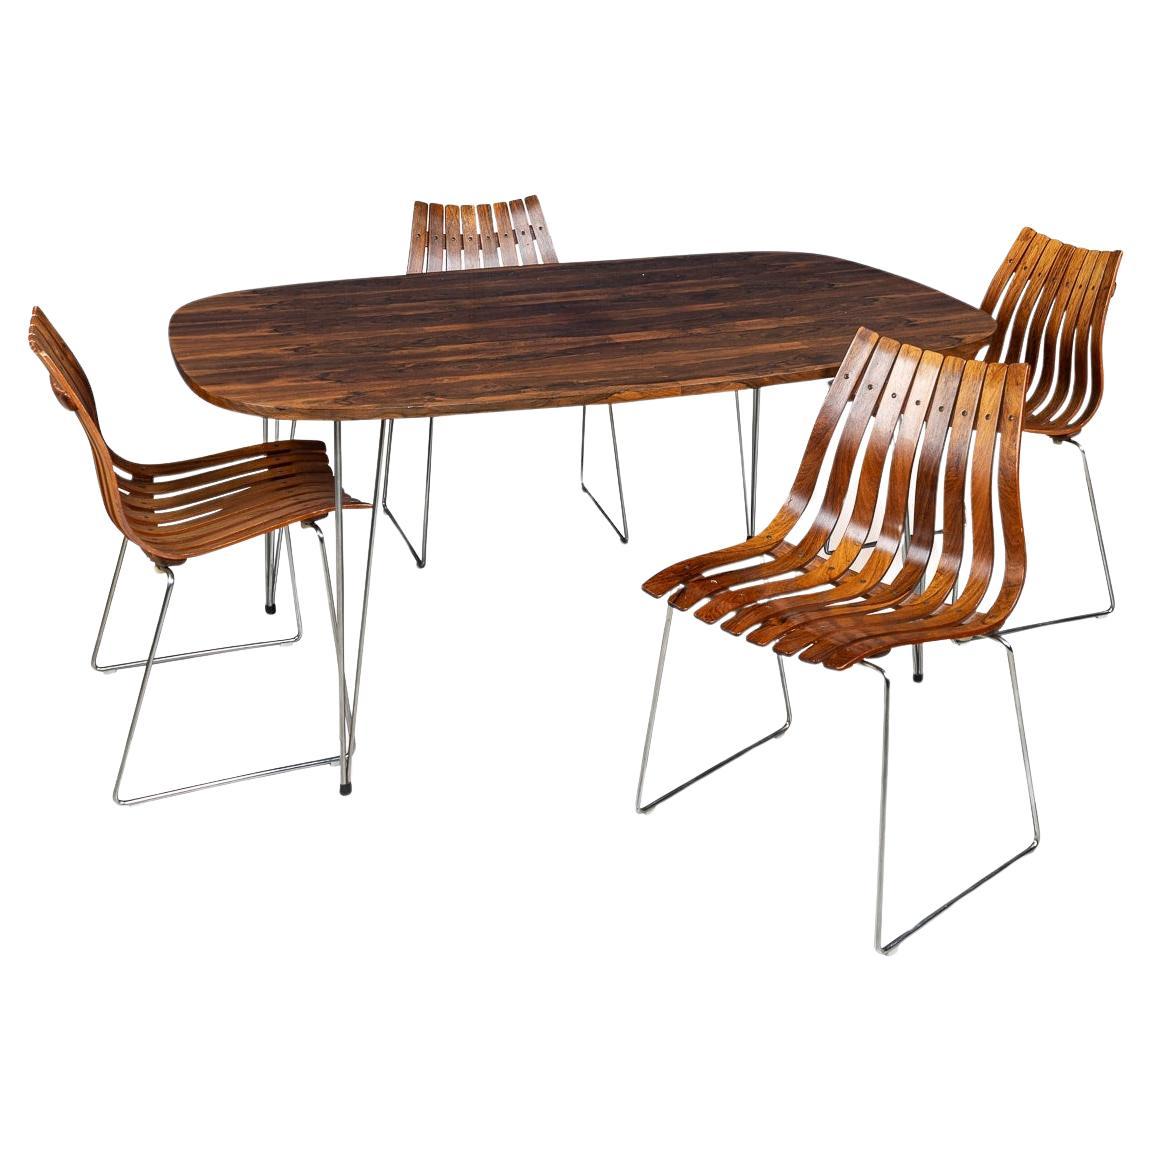 20thC Rosewood Dining Table & Chairs By Hans Brattrud For Hove Mobler, Norway